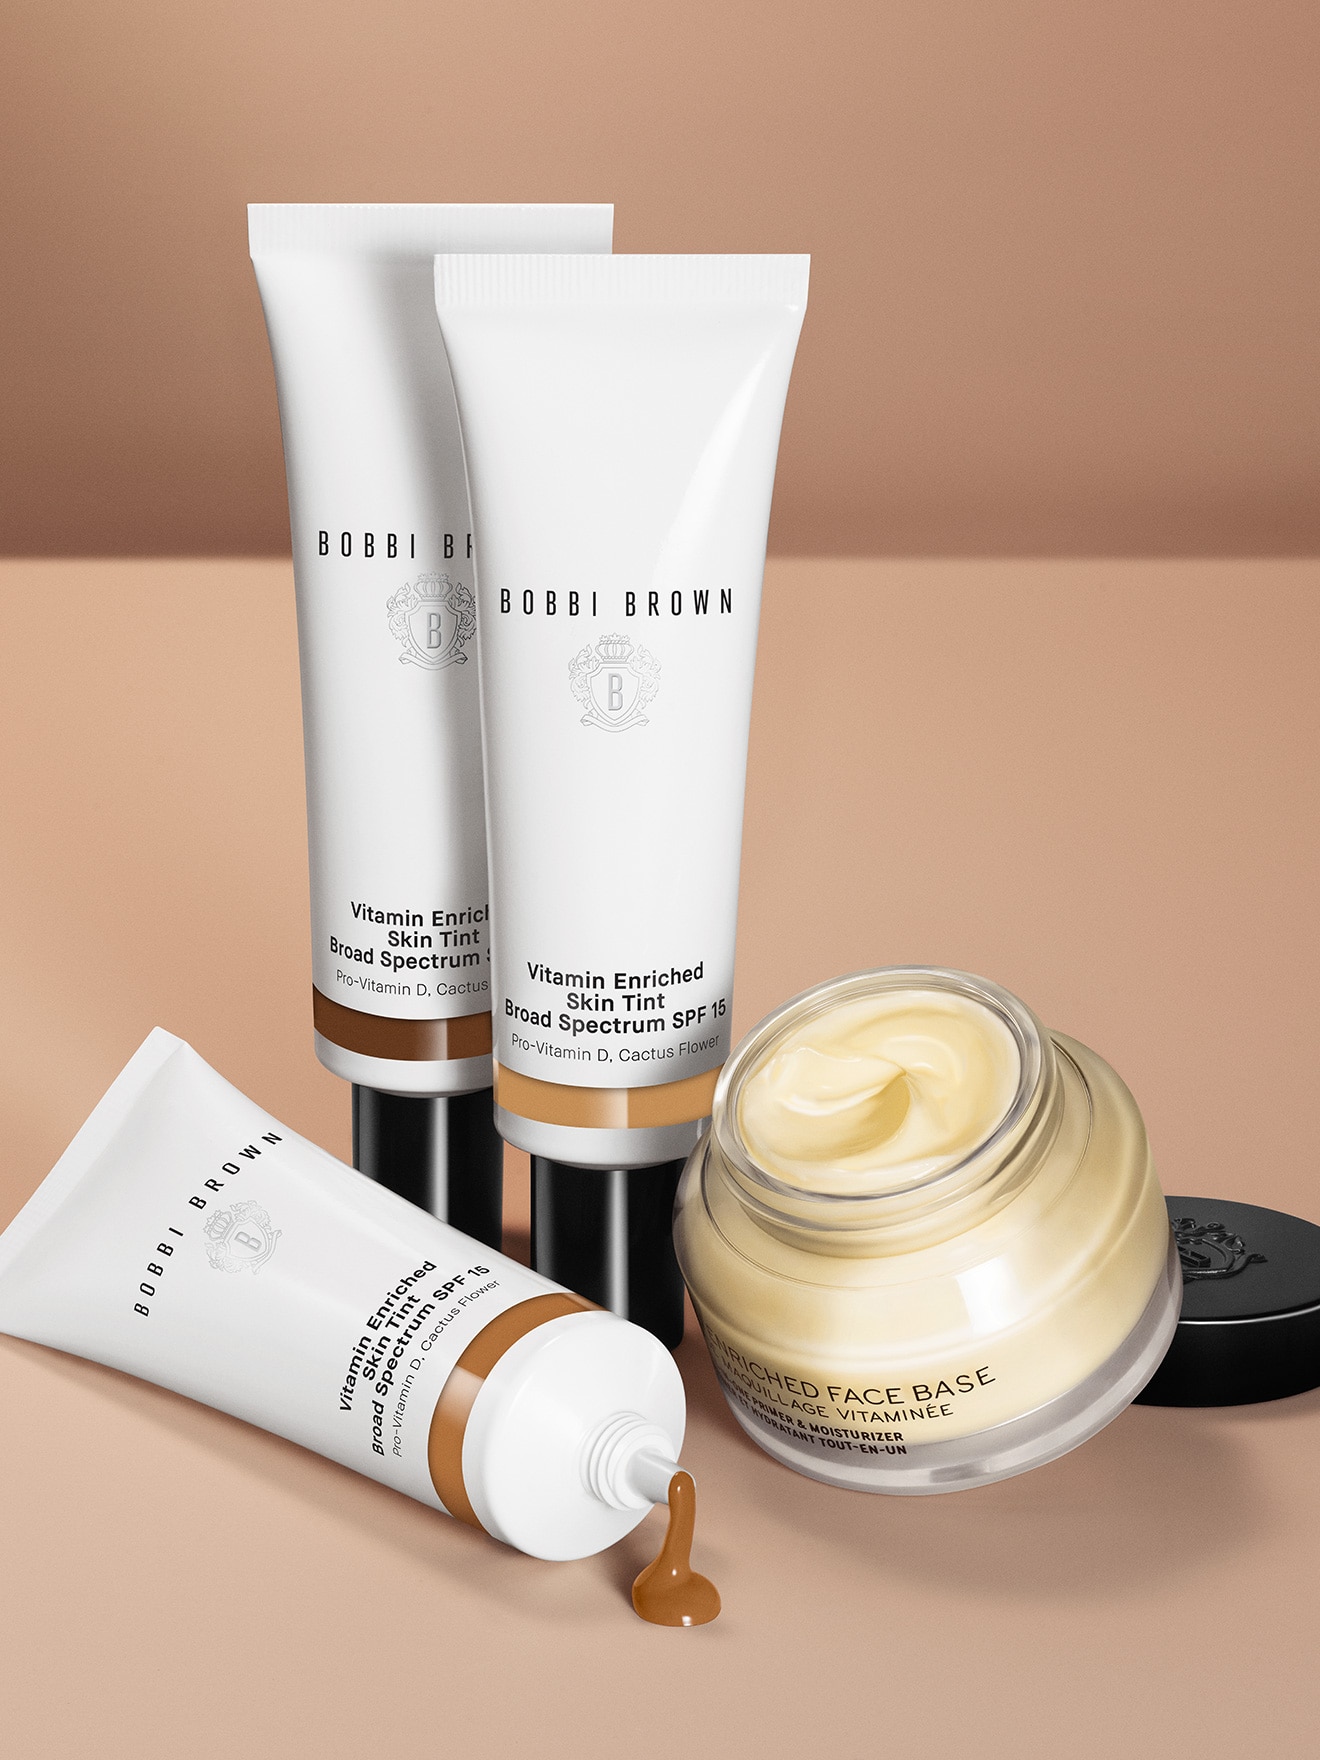 Multiple Vitamin Enriched Skin Tints dynamically placed next to our bestselling Vitamin Enriched Face Base